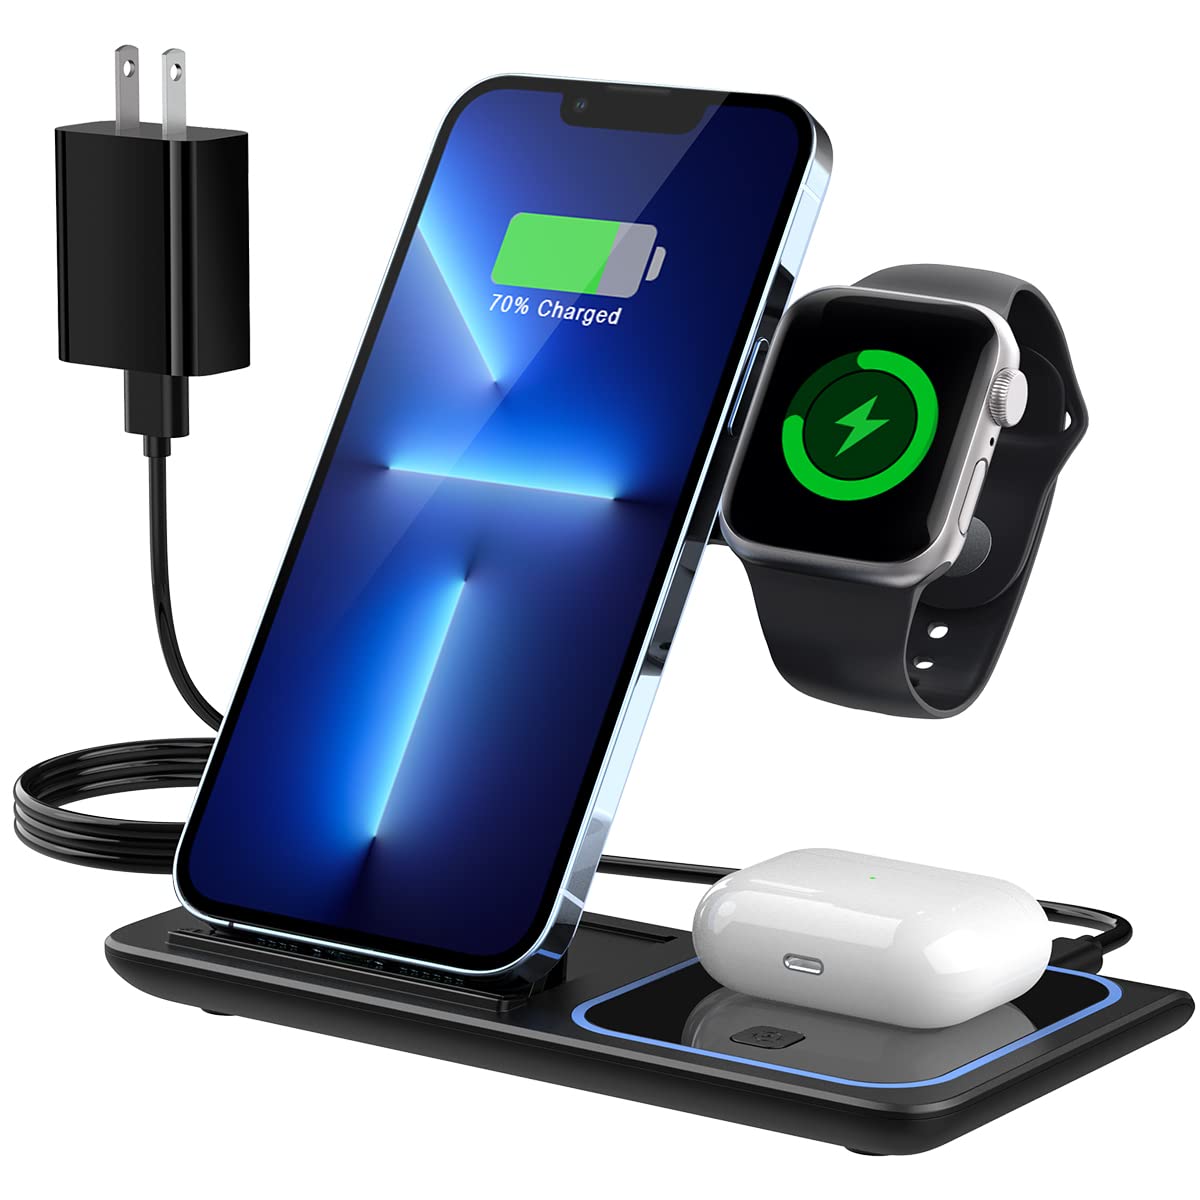 Top Phones Featuring Wireless Charging Capability